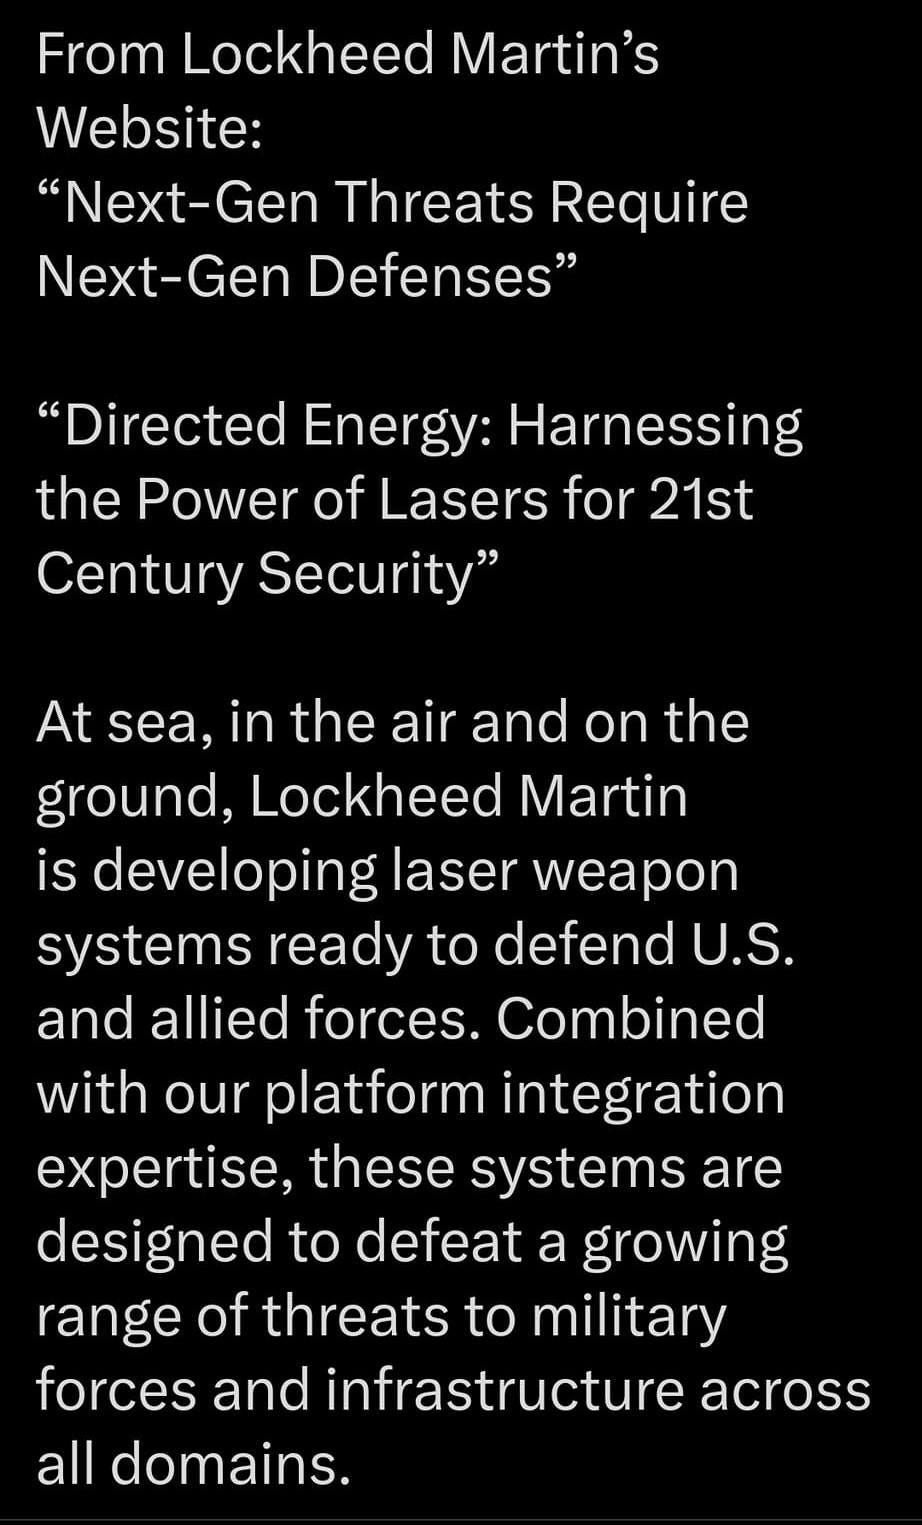 May be an image of text that says '10:18 5G, 40% Post From Lockheed Martin's Website: "Next-Gen Threats Require Next-Gen Defenses" "Directed Energy: Harnessing the Power of Lasers for 21st Century Security" At sea, in the air and on the ground, Lockheed Martin is developing laser weapon systems ready to defend U.S. and allied forces. Combined with our platform integration expertise, these systems are designed to defeat a growing range of threats to military forces and infrastructure across all domains. Post your'